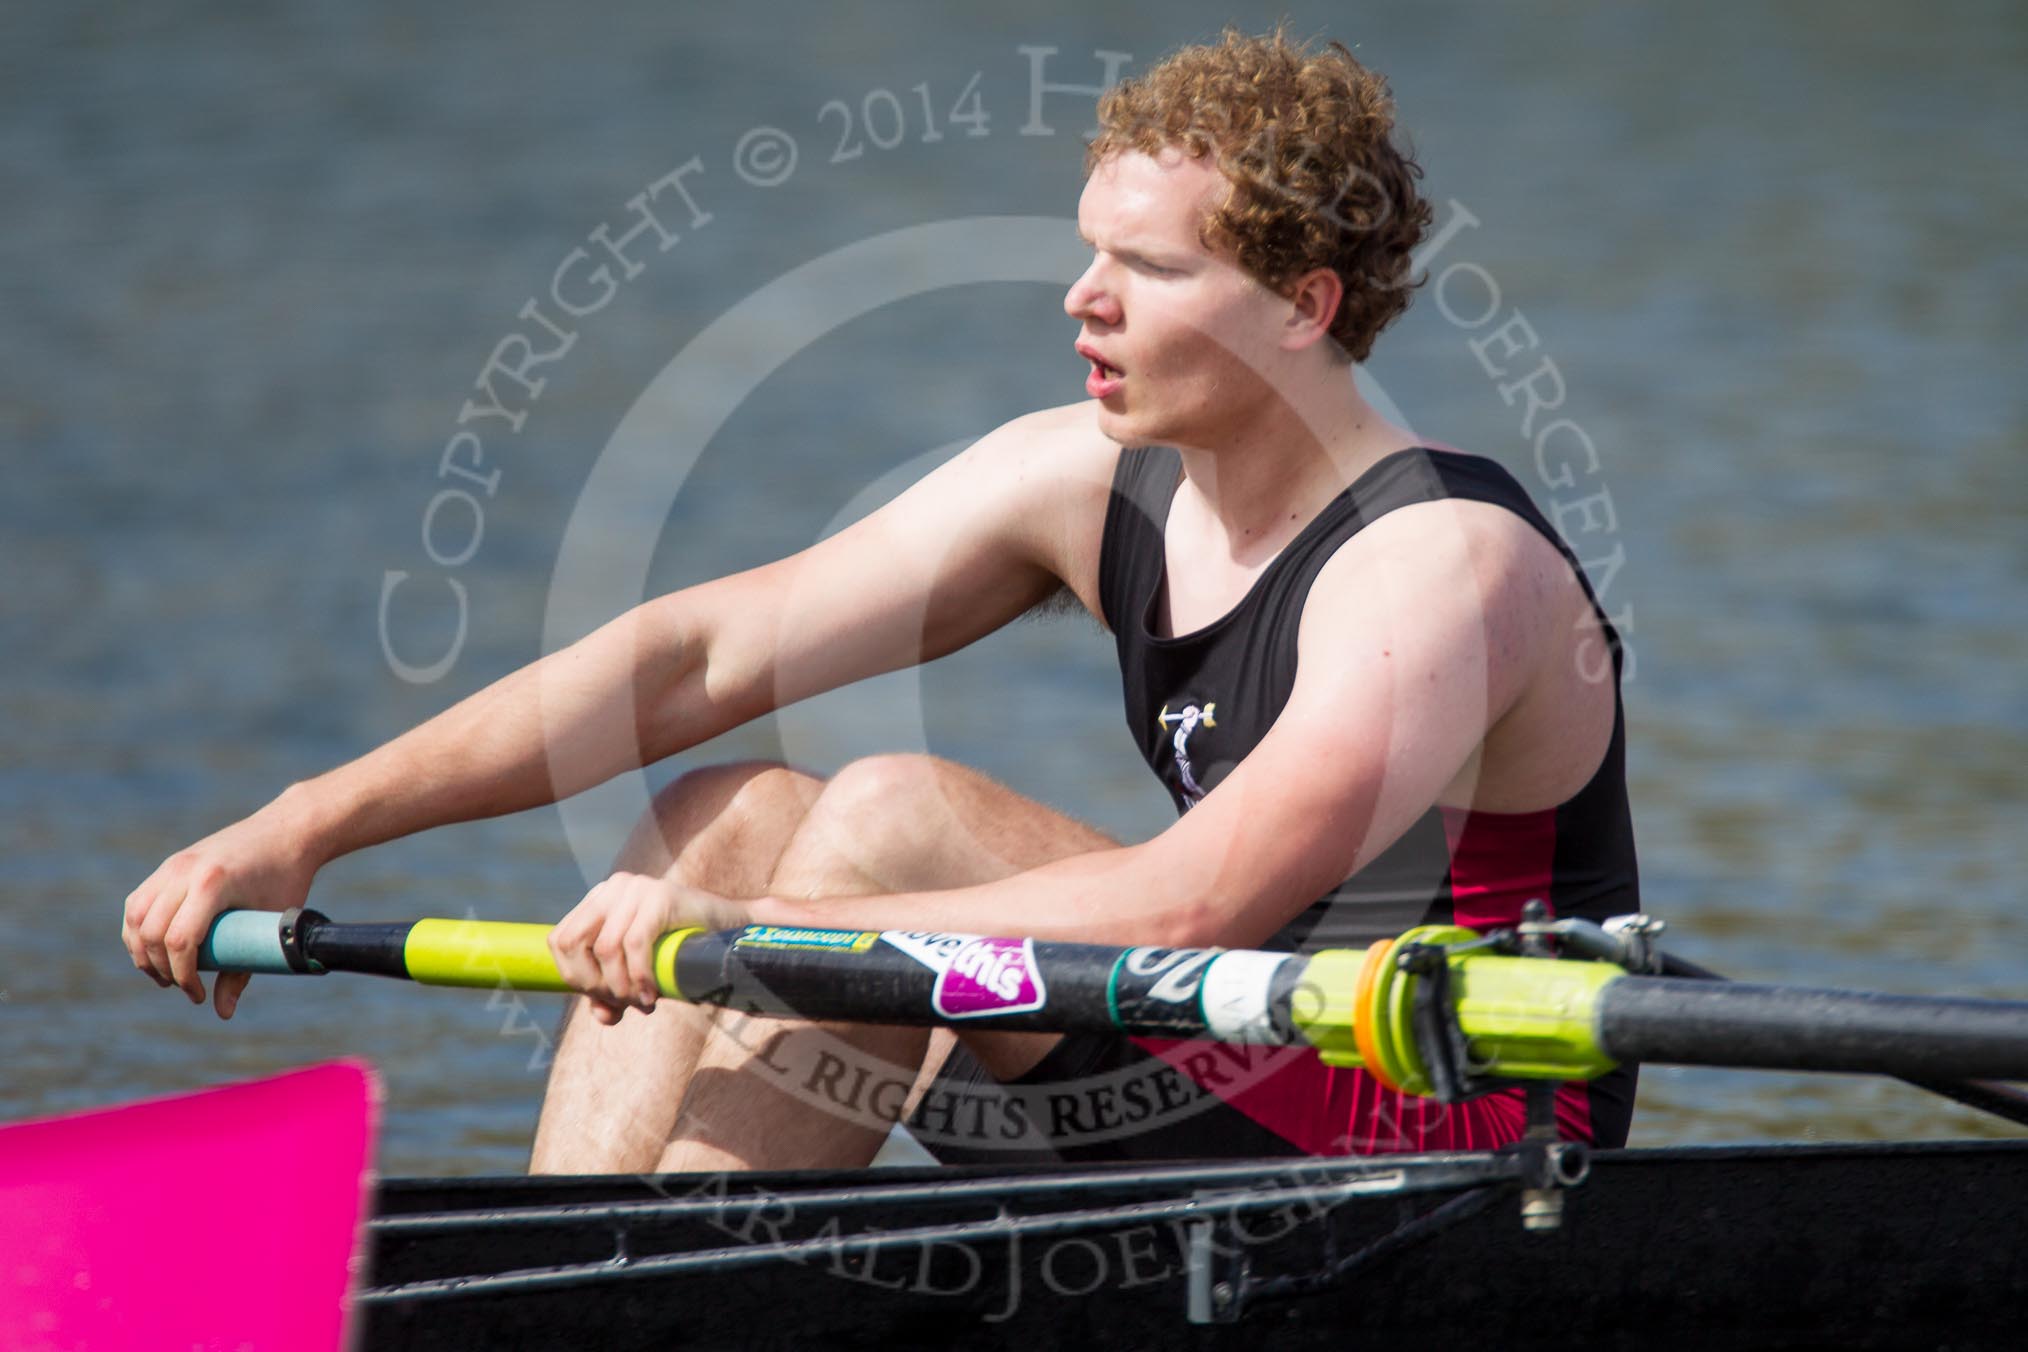 The Women's Boat Race and Henley Boat Races 2014: The Intercollegiate men's race. In the Downing College (Cambridge) boat in the 3 seat Roman Kolacz..
River Thames,
Henley-on-Thames,
Buckinghamshire,
United Kingdom,
on 30 March 2014 at 13:52, image #96